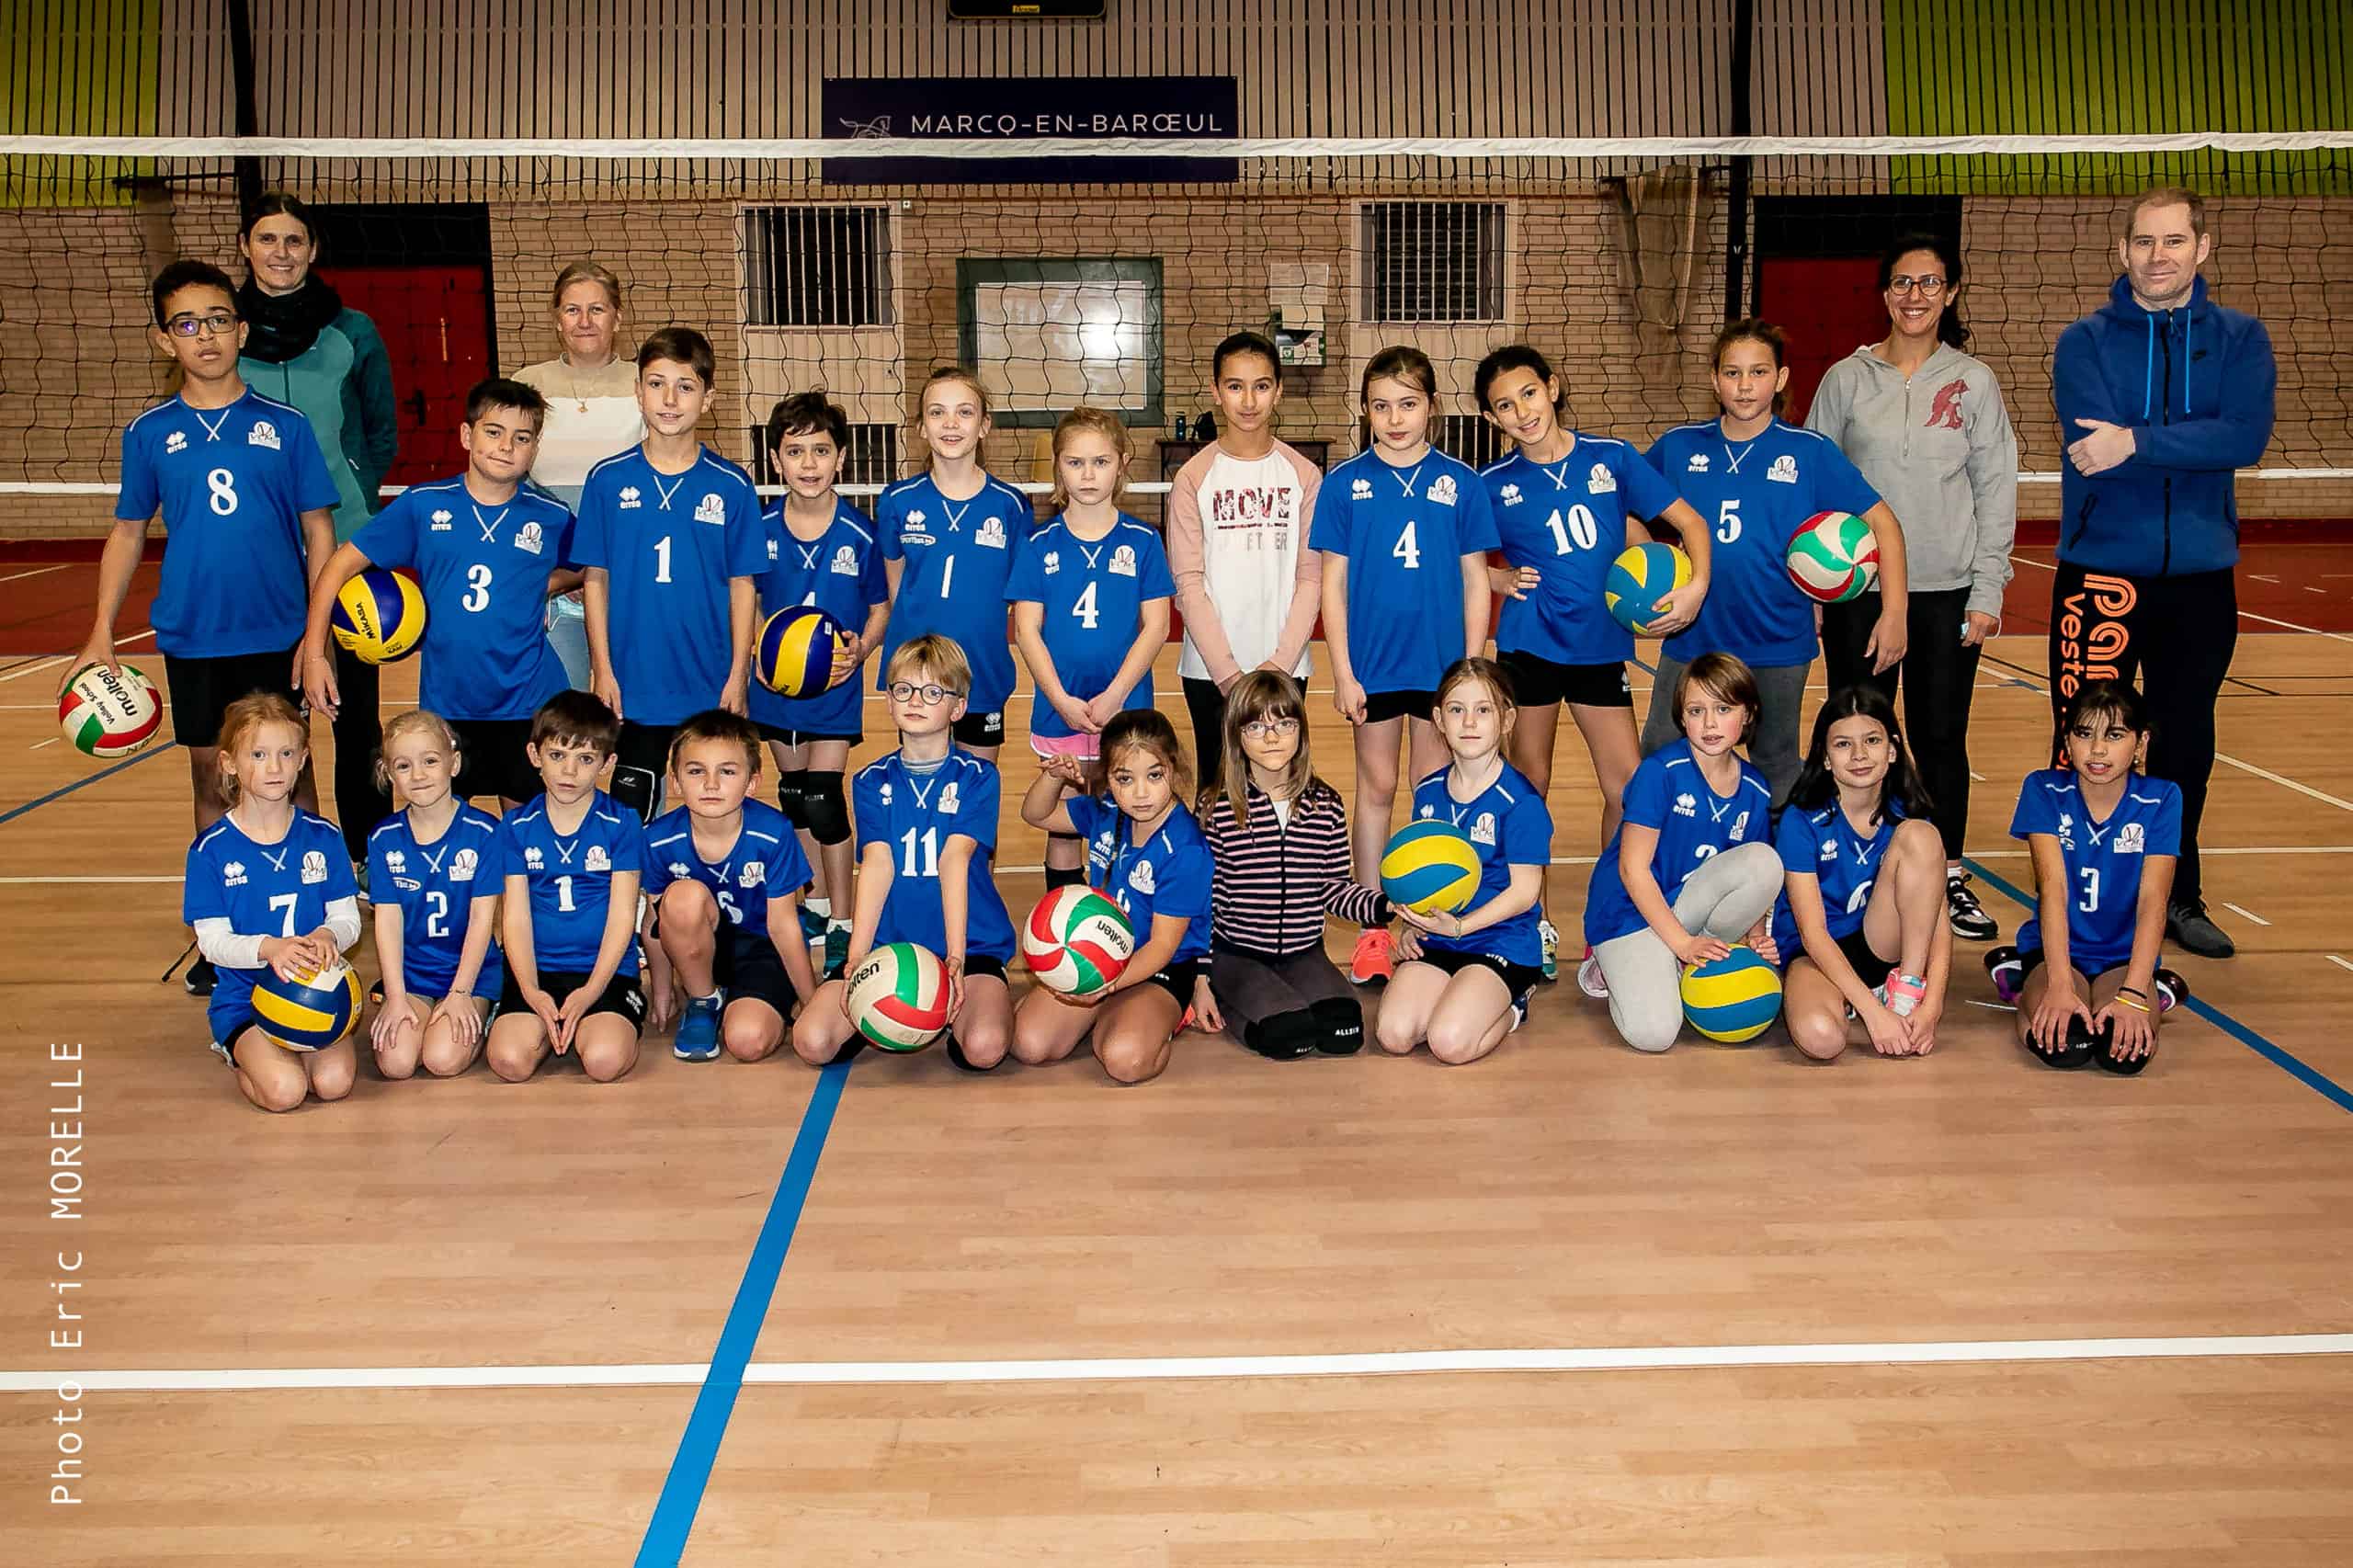 https://www.marcqvolley.com/wp-content/uploads/2022/04/Ecole-Volley-scaled.jpg